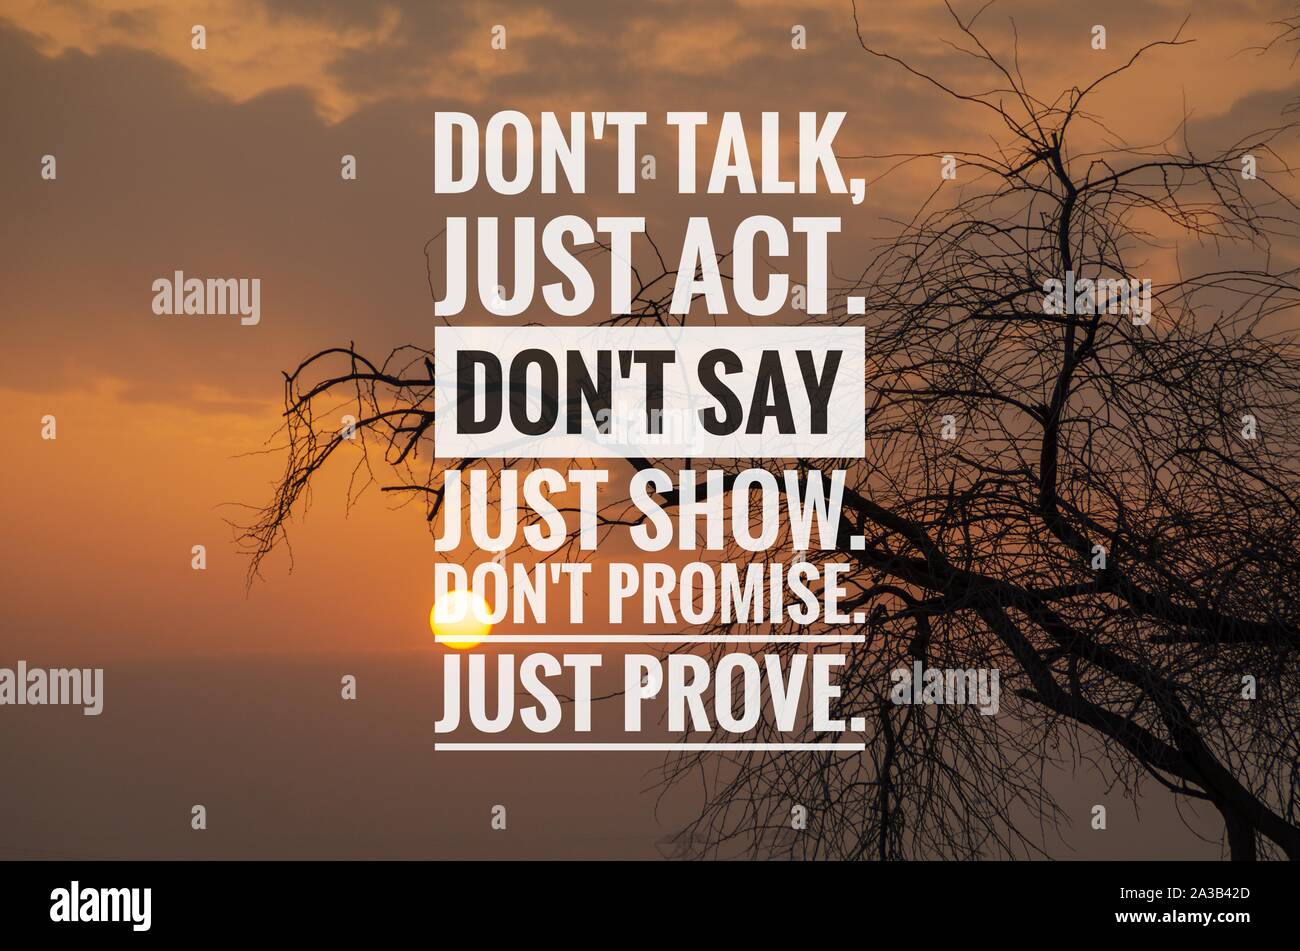 John Wayne Quote: “Talk low, talk slow and don't say too much.” HD wallpaper  | Pxfuel